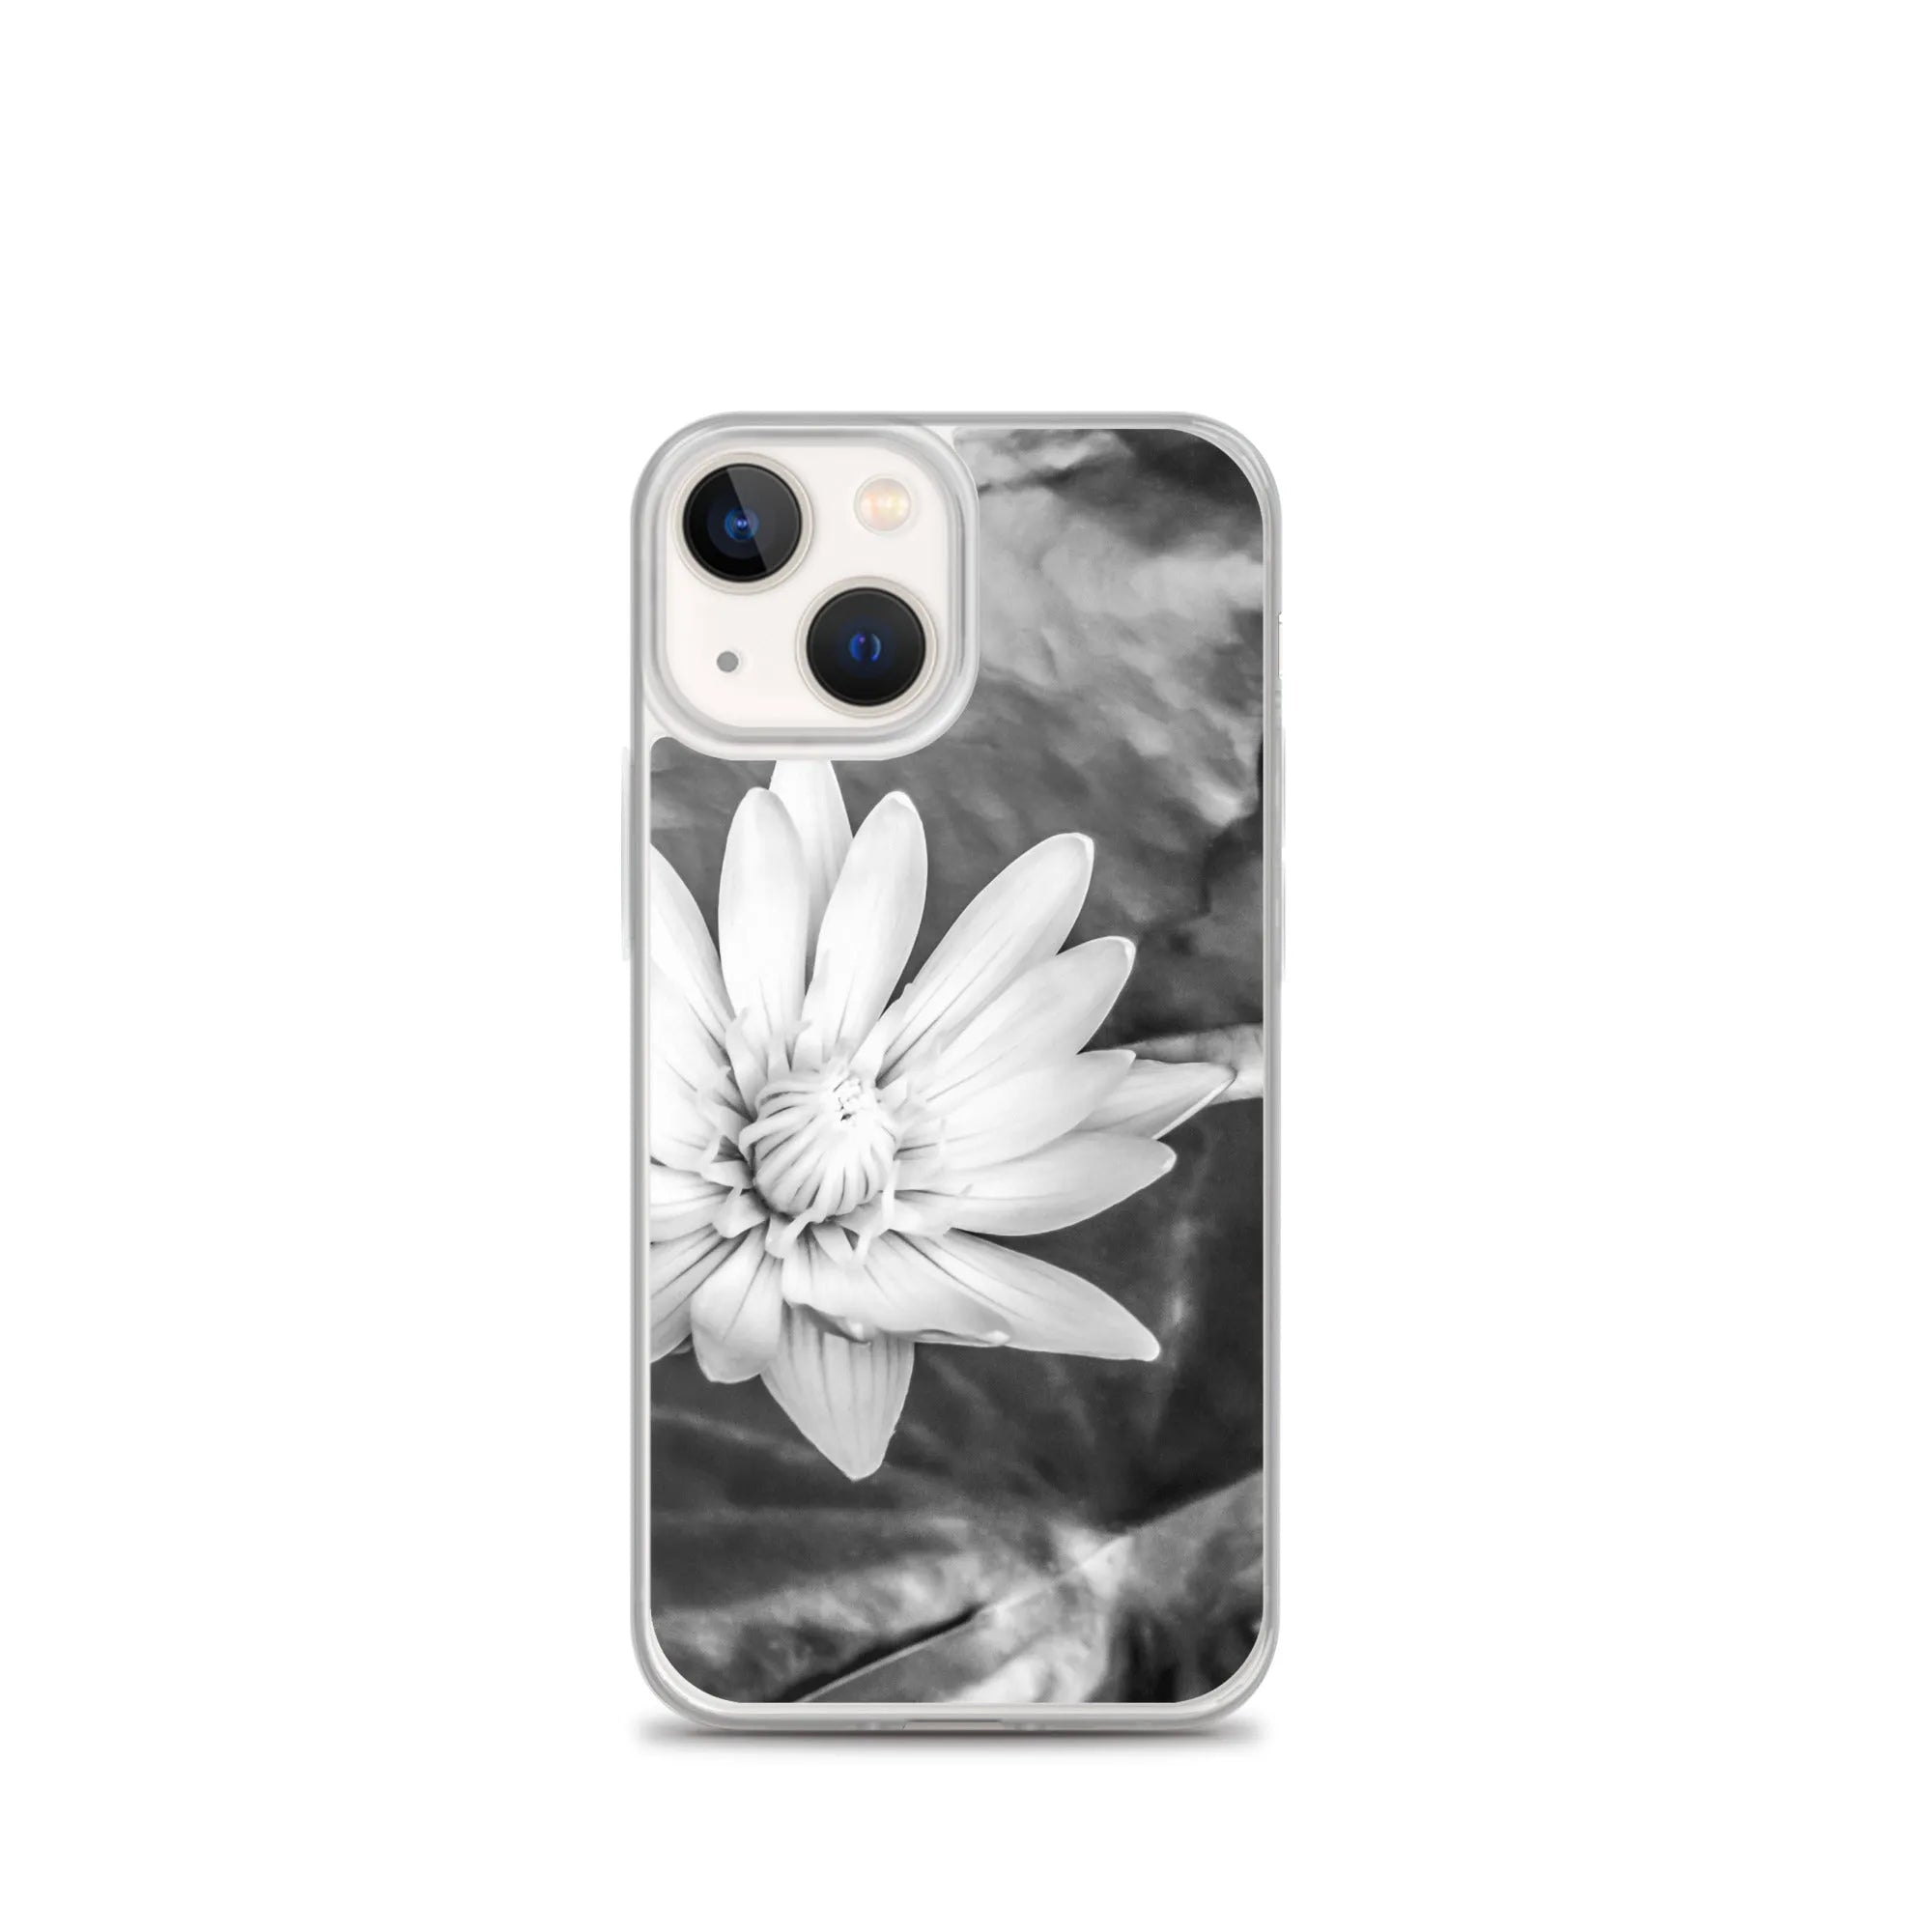 Breakthrough Floral Iphone Case - Black And White - Iphone 13 Mini - Mobile Phone Cases - Aesthetic Art